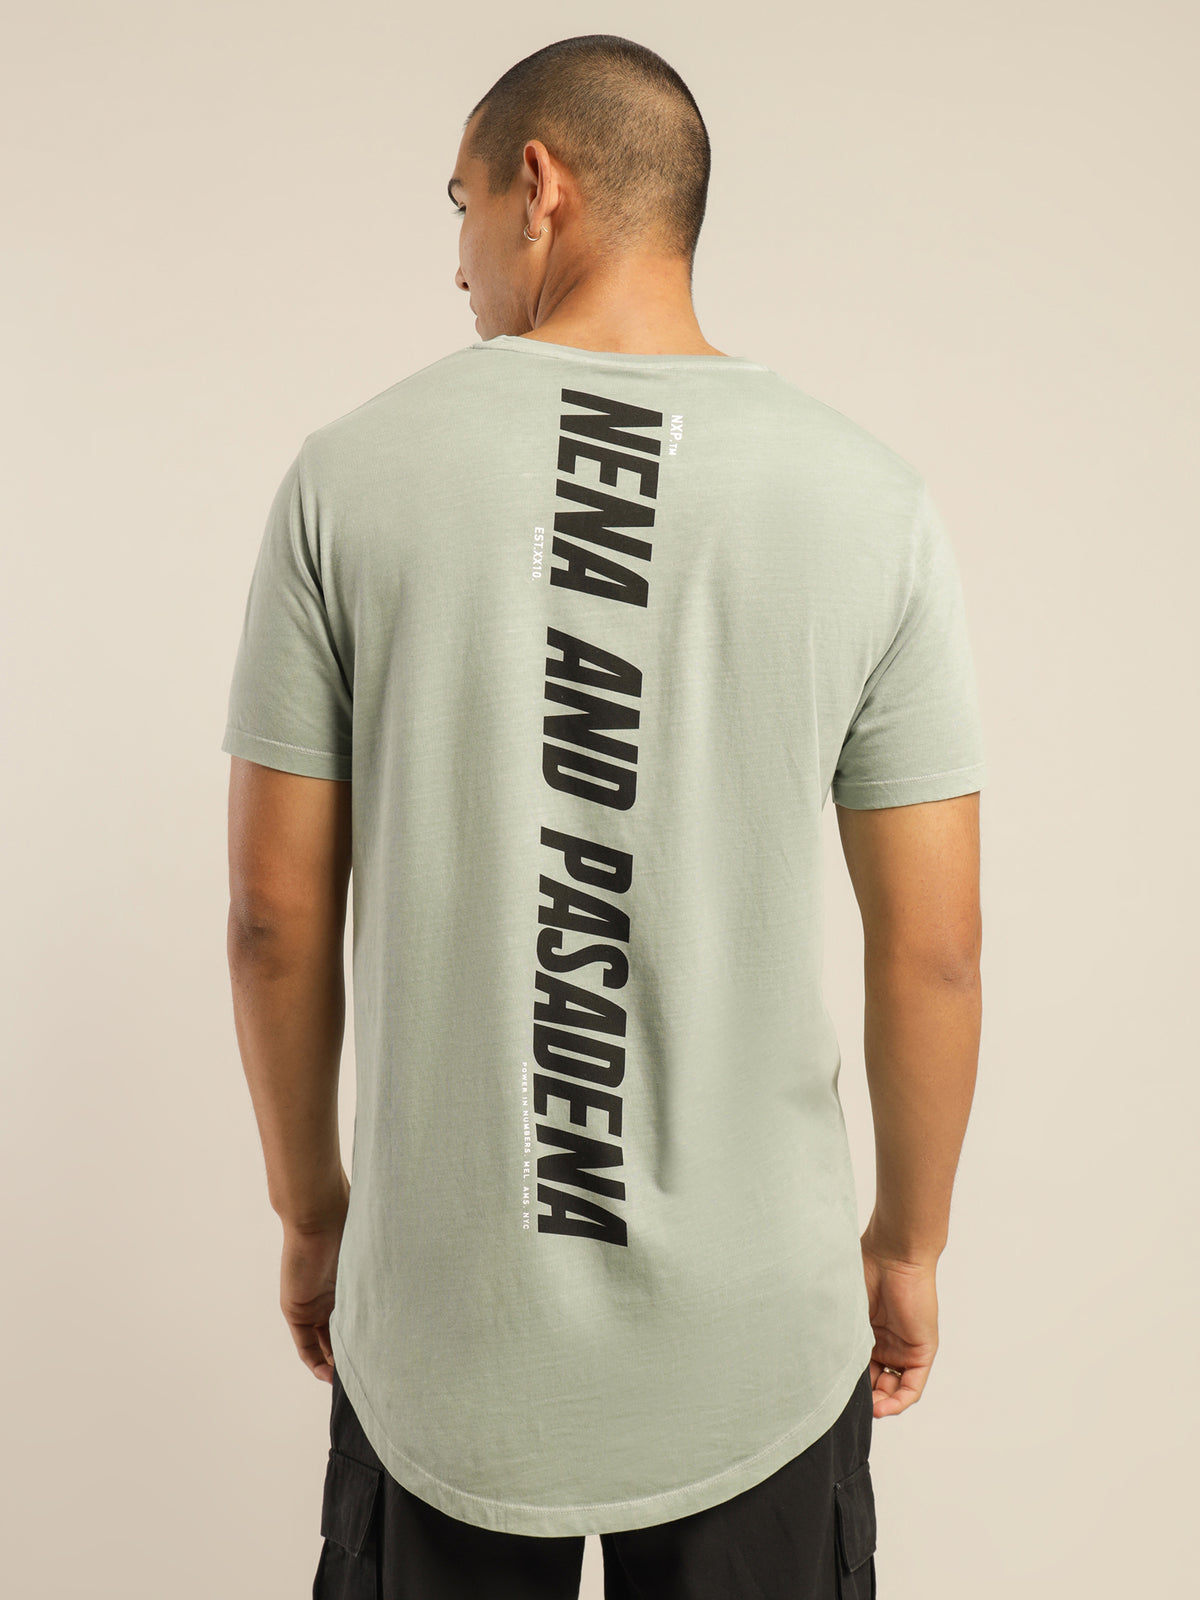 All Over Cape Back T-Shirt in Pigment Sage